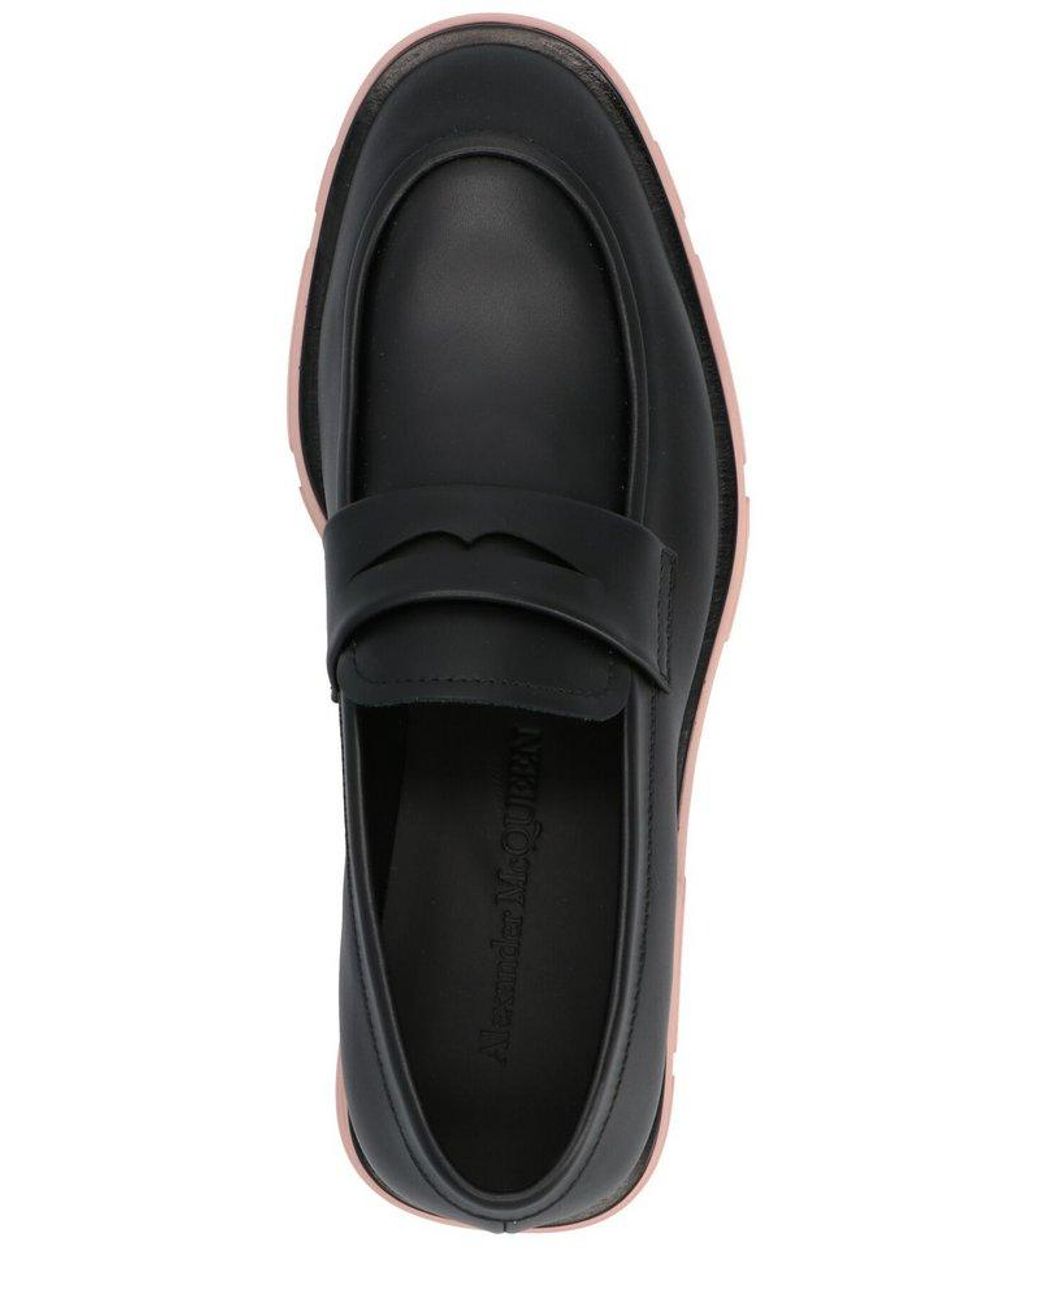 Save 2% Alexander McQueen Leather Loafers in Black for Men Mens Slip-on shoes Alexander McQueen Slip-on shoes 